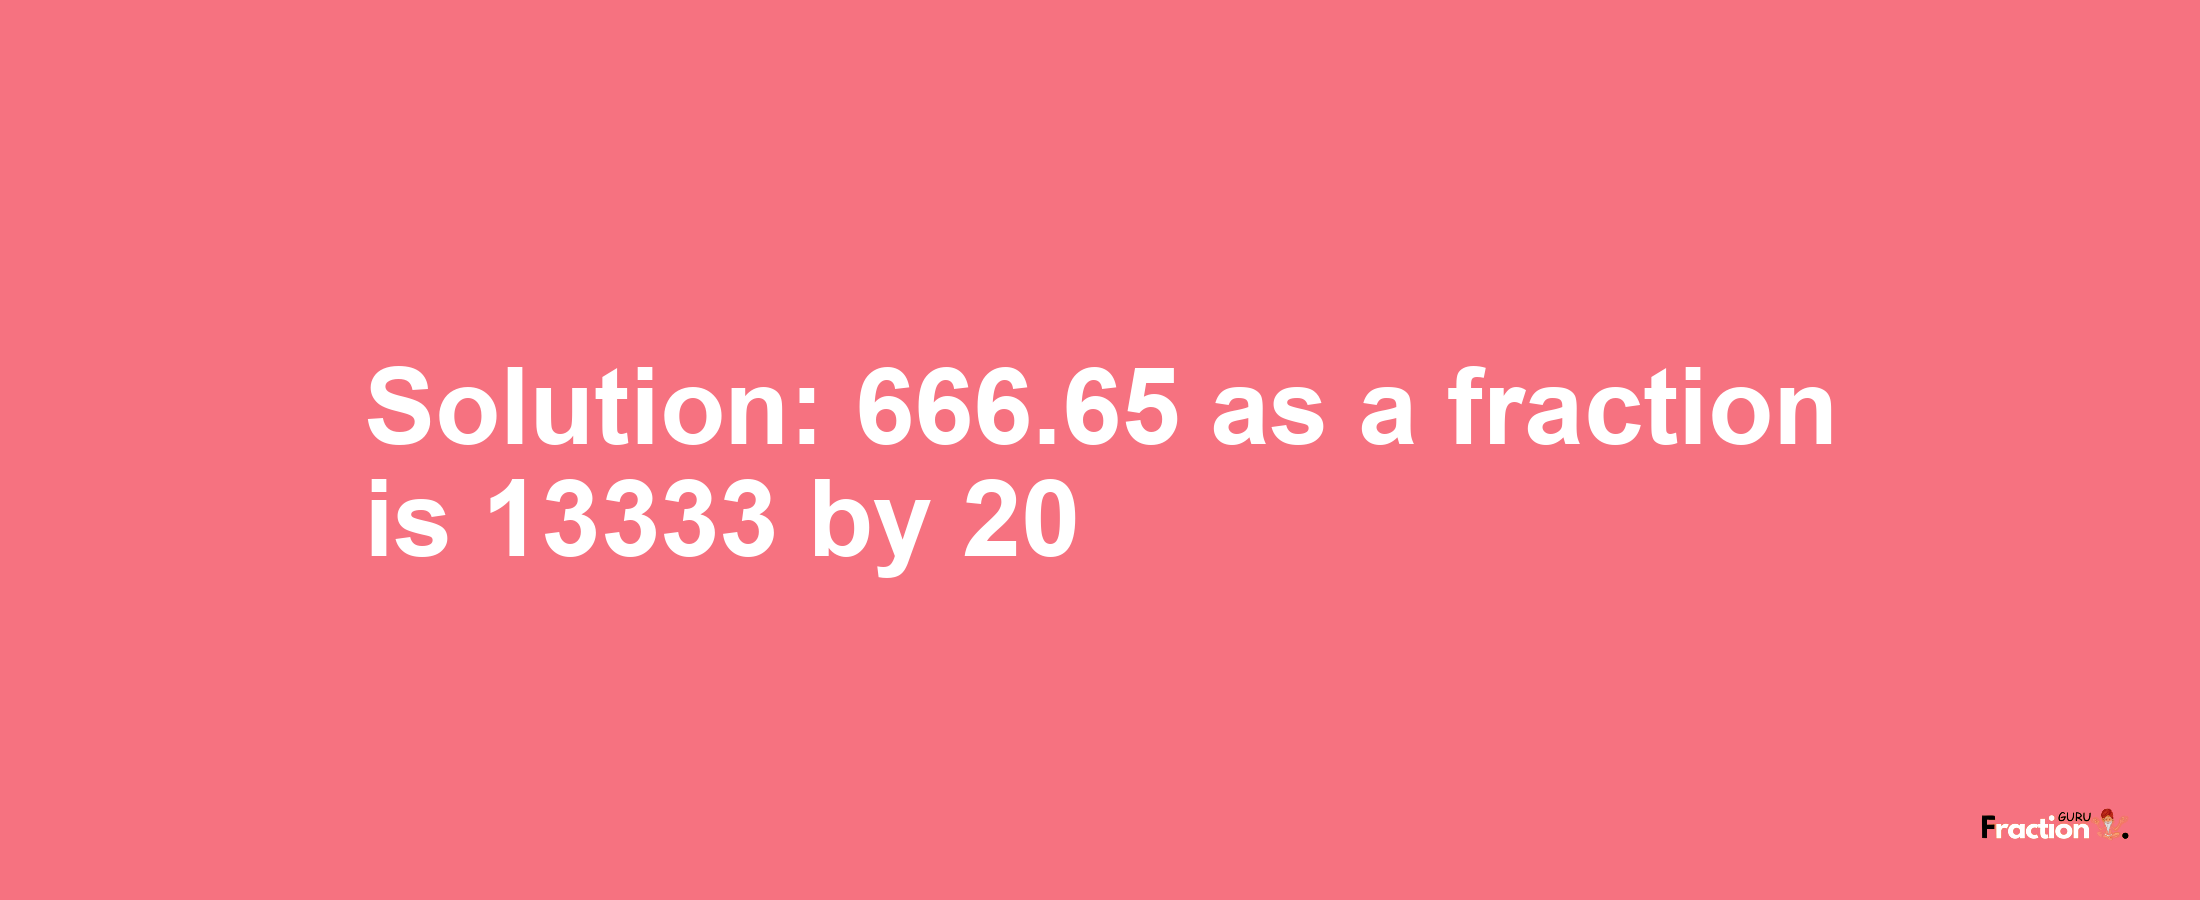 Solution:666.65 as a fraction is 13333/20